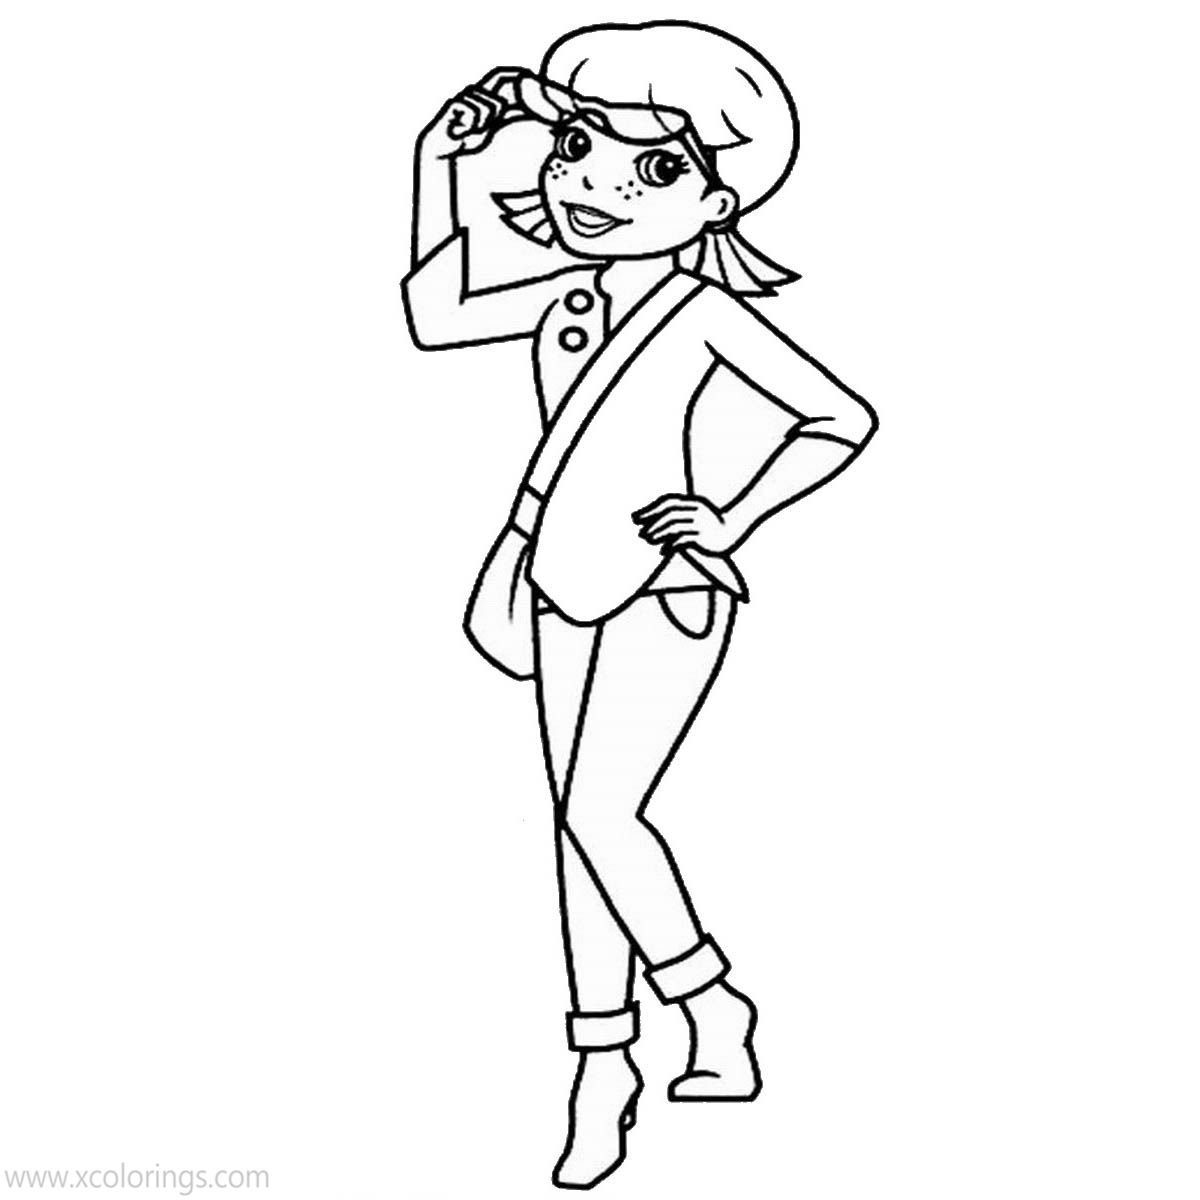 Free Polly Pocket Character Coloring Pages Lea printable